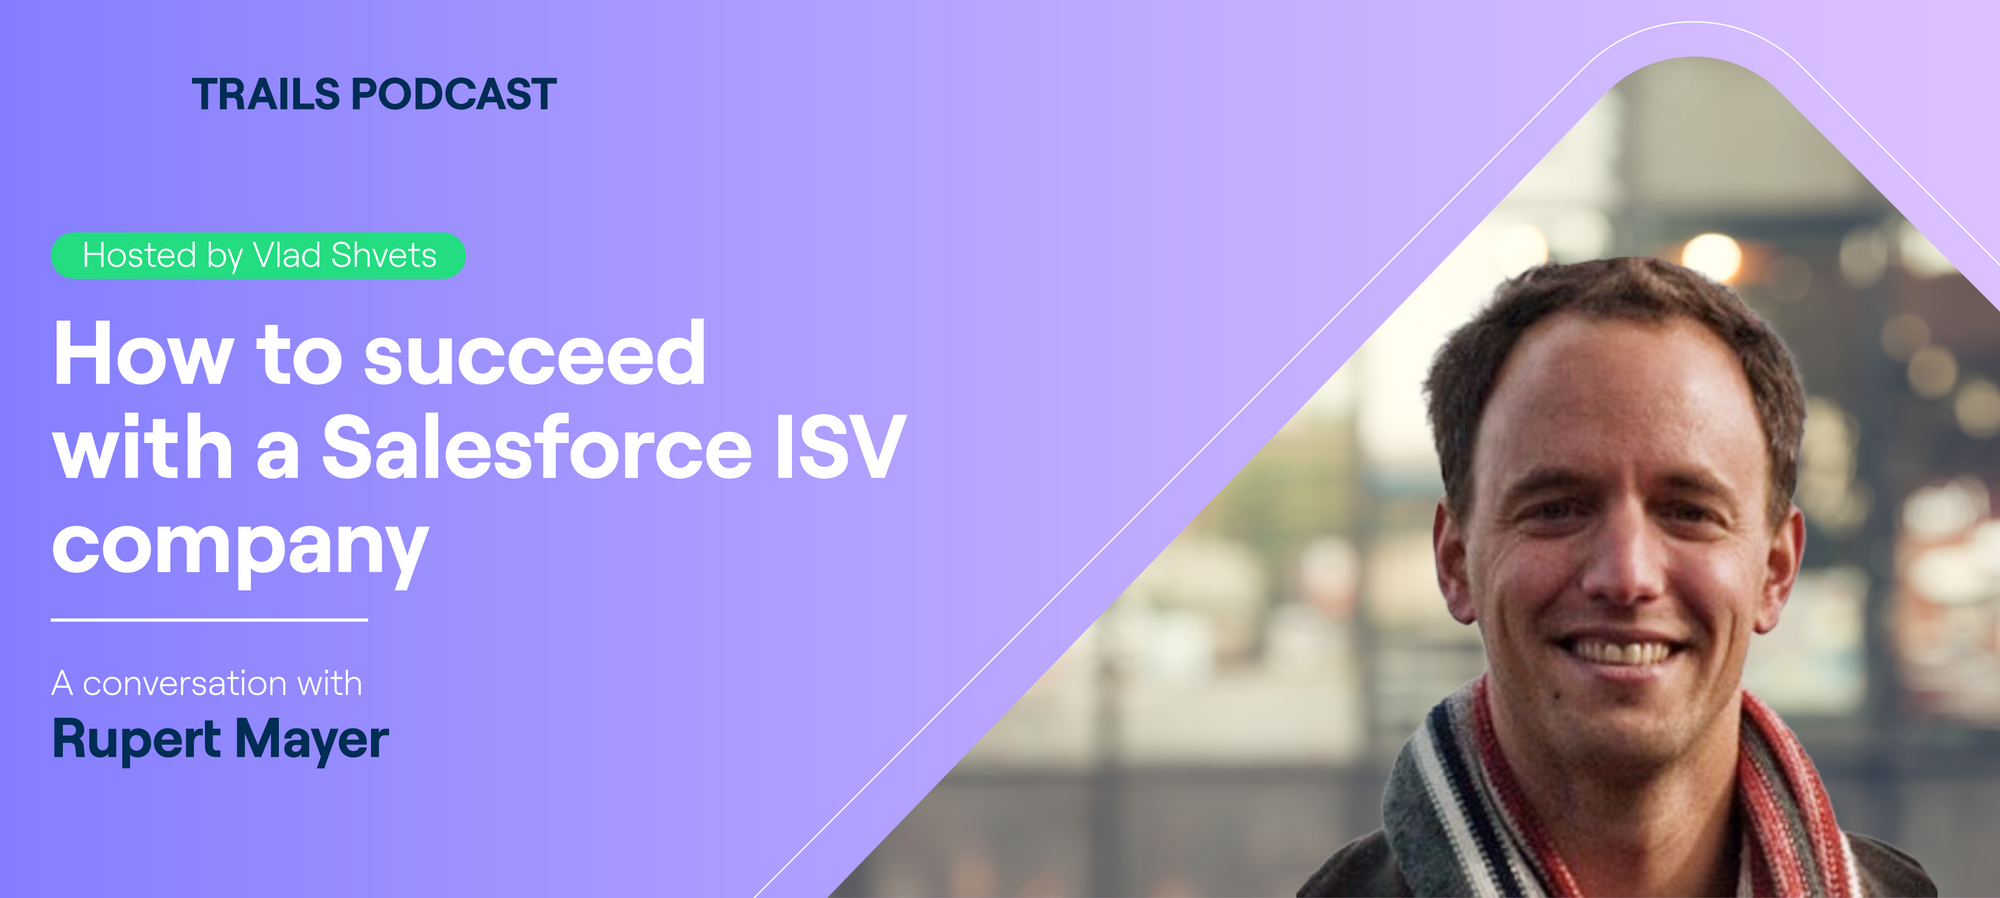 How to succeed with a Salesforce ISV company (Trails podcast episode #3 with Rupert Mayer)